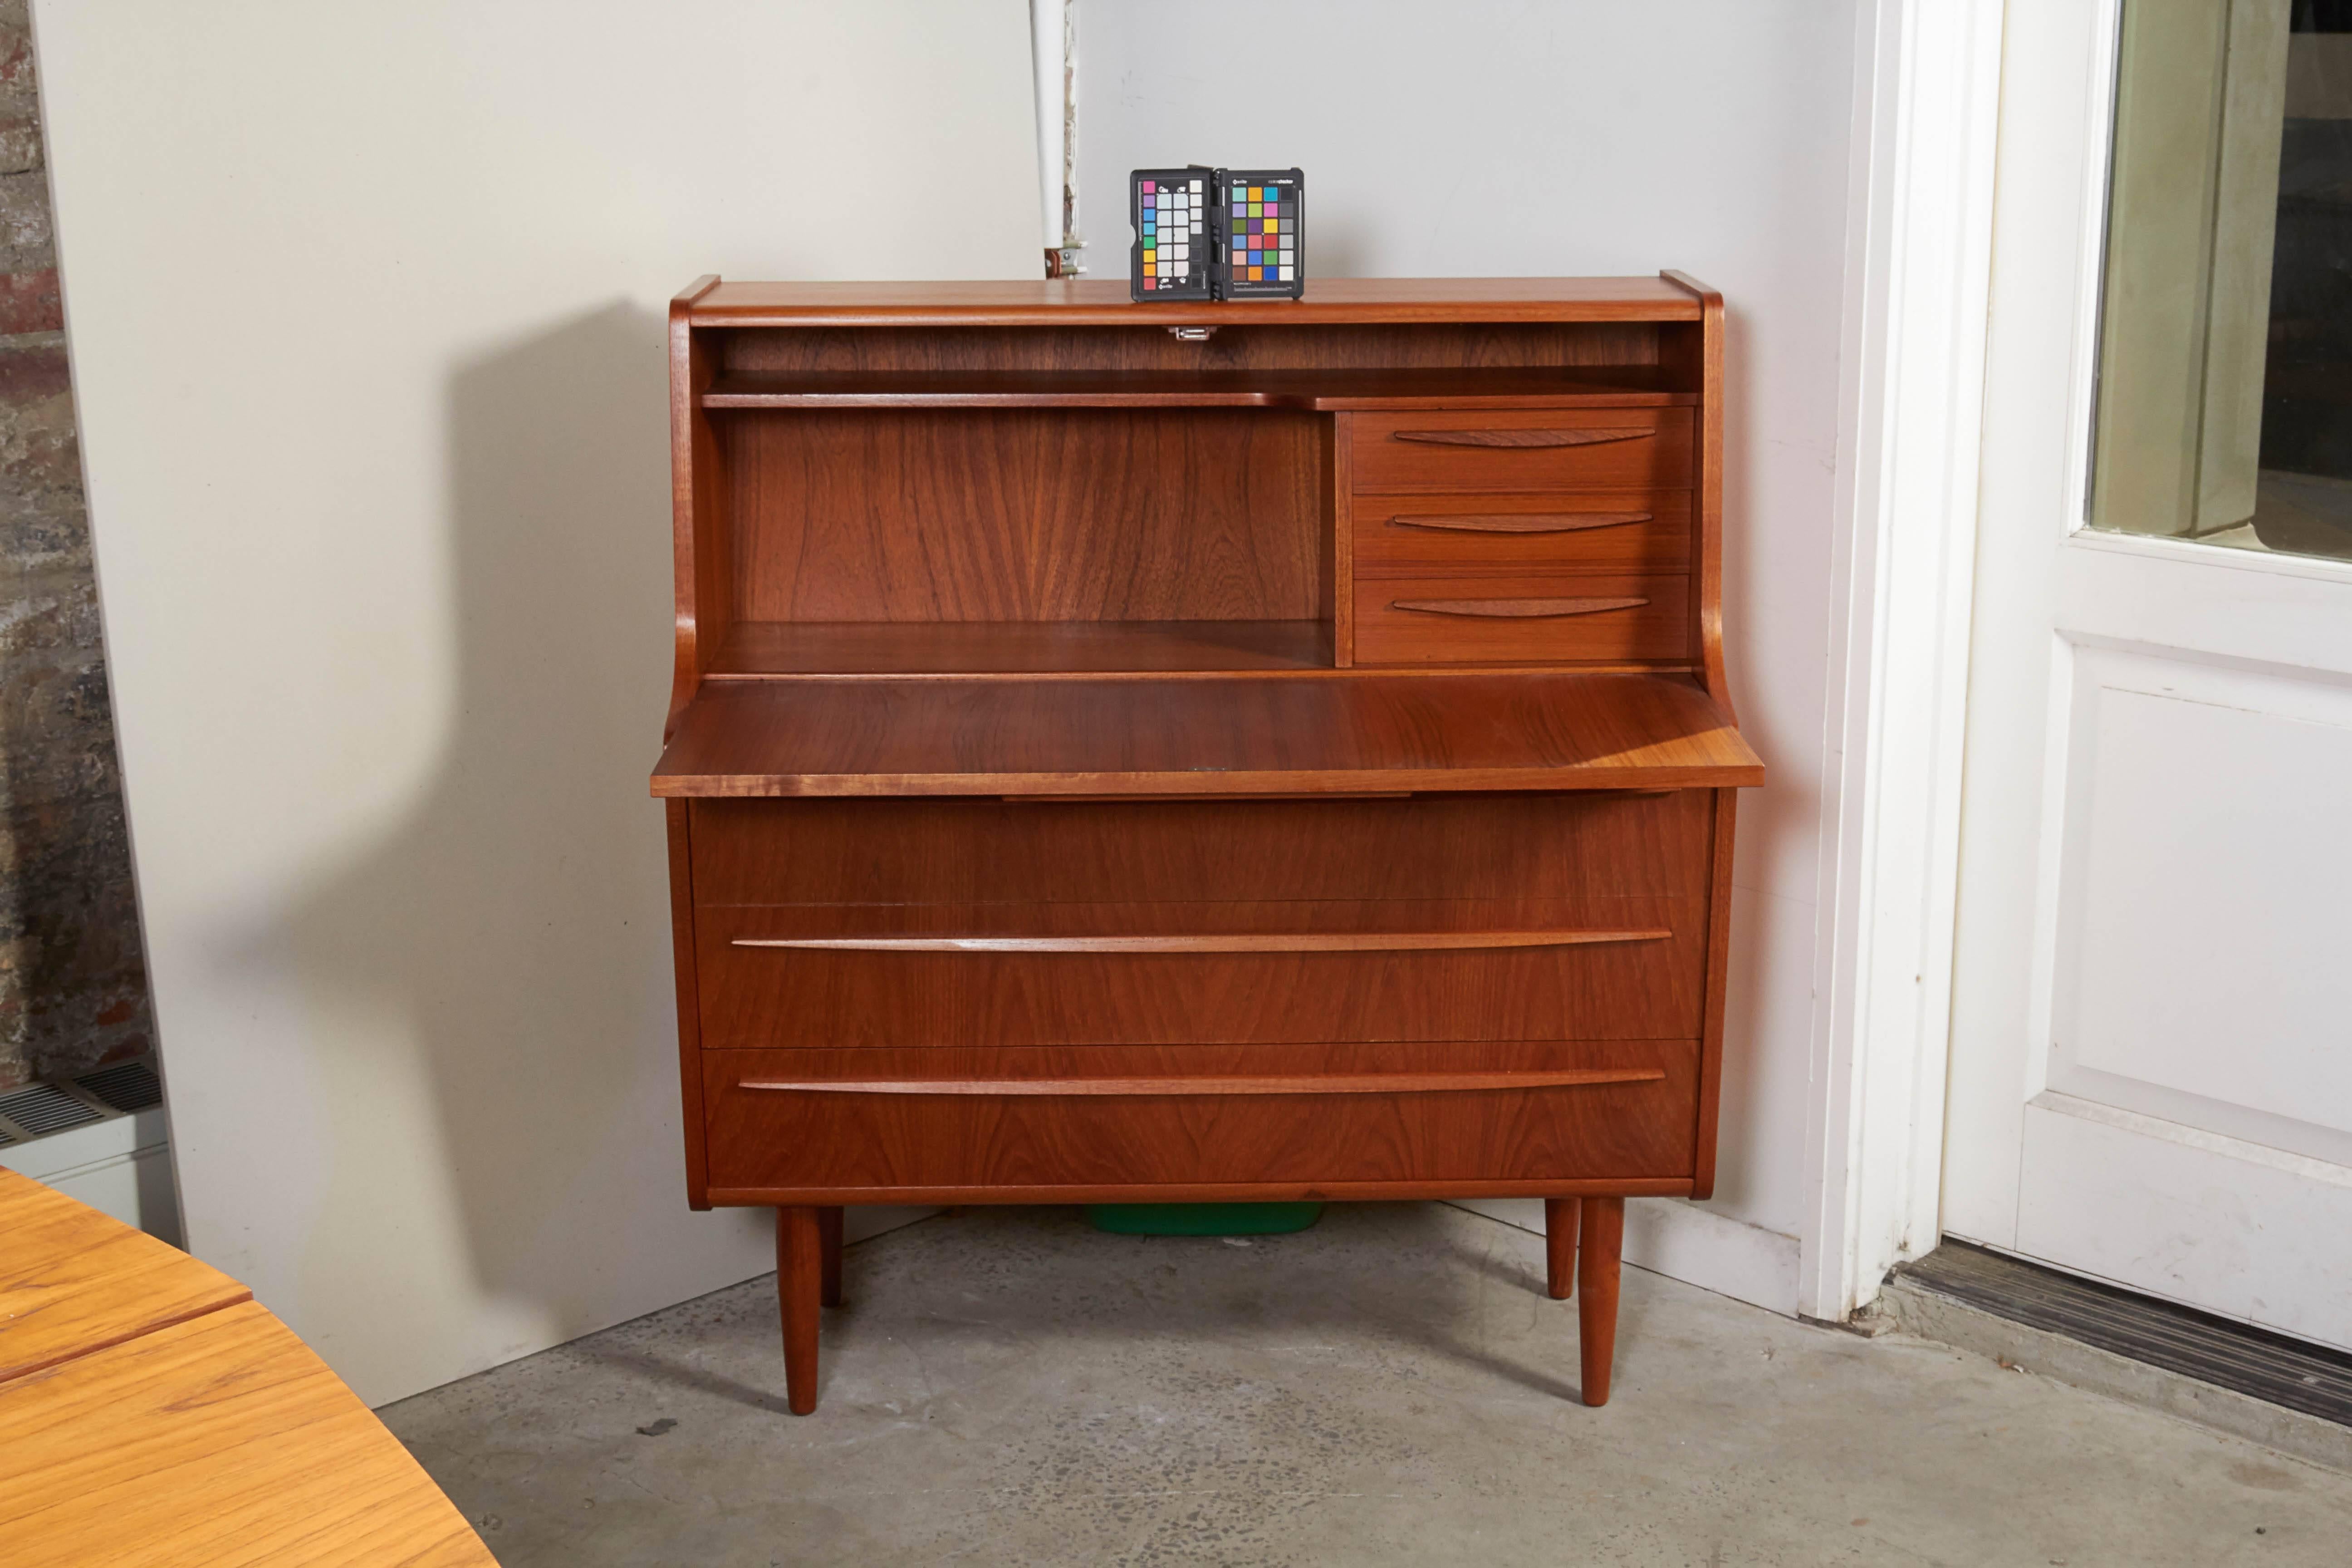 Vintage 1960s Danish Secretary Desk & Dresser

Excellent for use in a bedroom or guest room. The drawers are dresser size and the desk is a big added bonus. Small enough for any room. The depth of the secretary when the desk is pulled out is